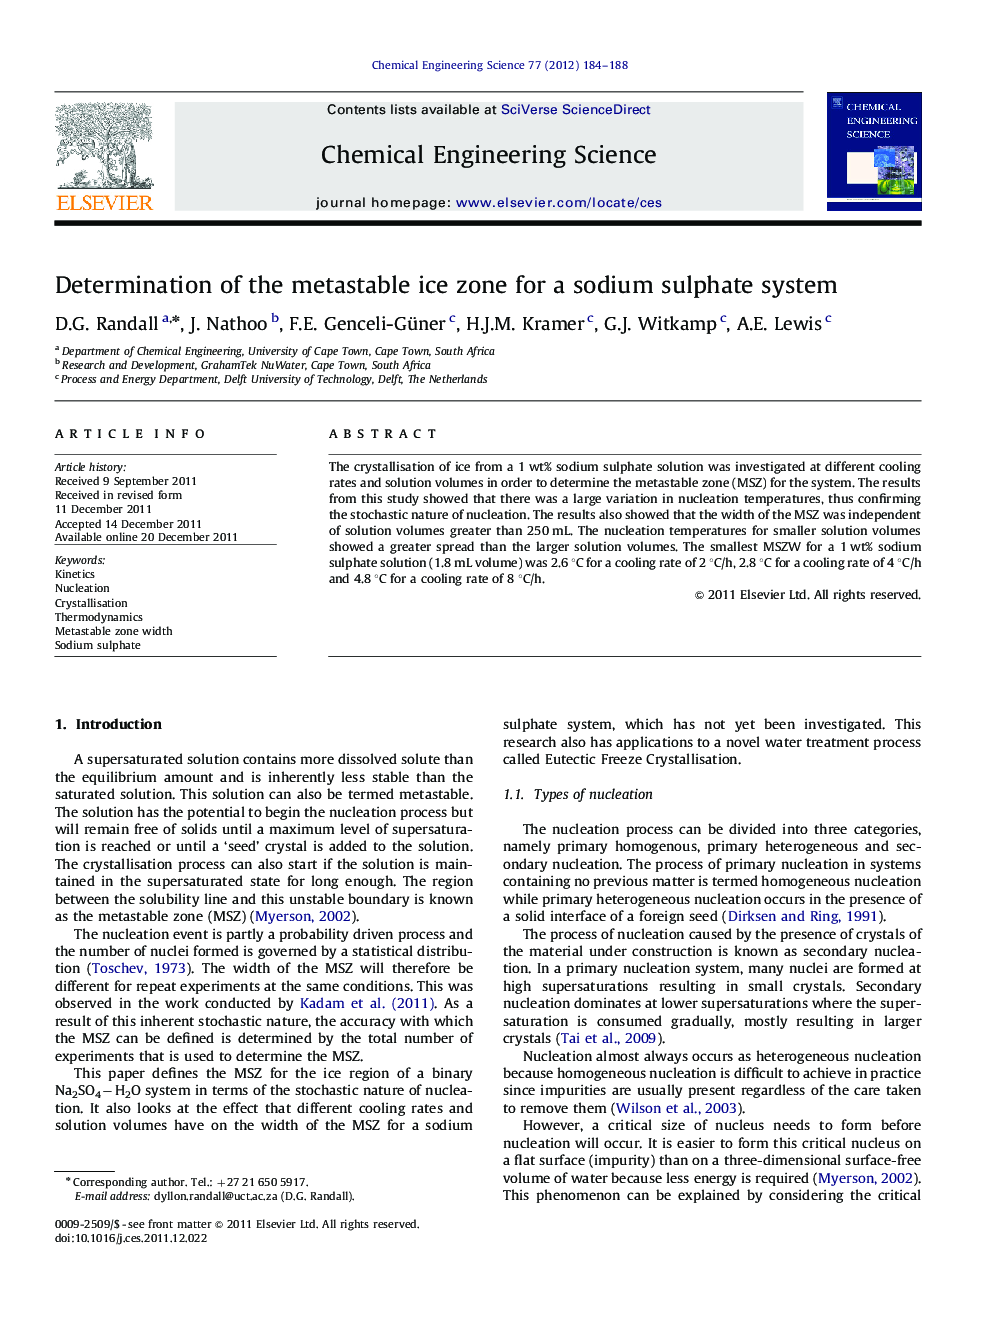 Determination of the metastable ice zone for a sodium sulphate system